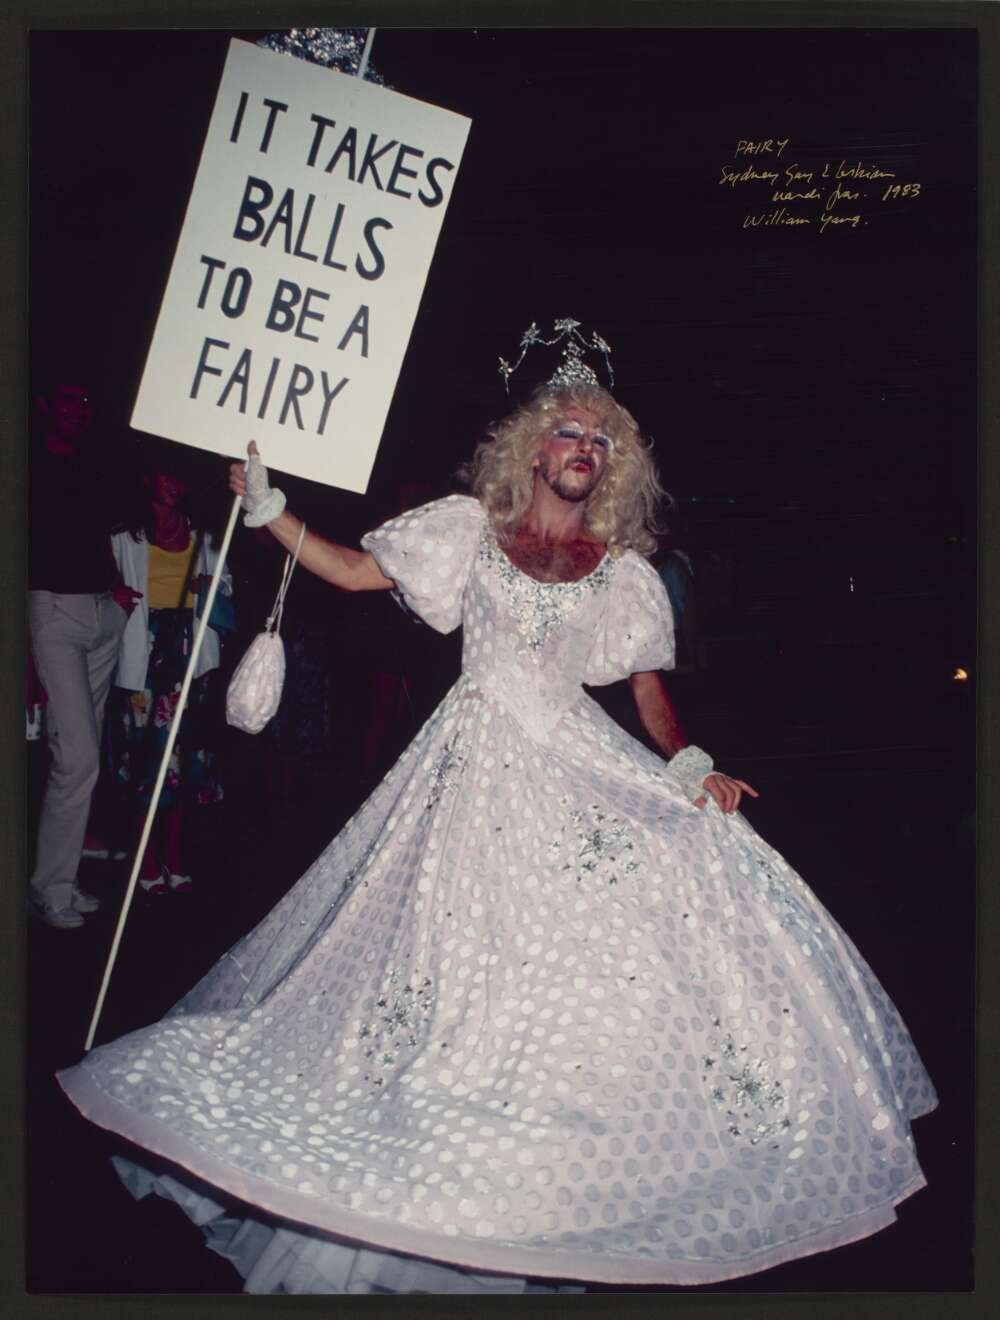 Man in a pink princess dress, blonde wig and tiara holding a sign saying 'It takes balls to be a fairy'